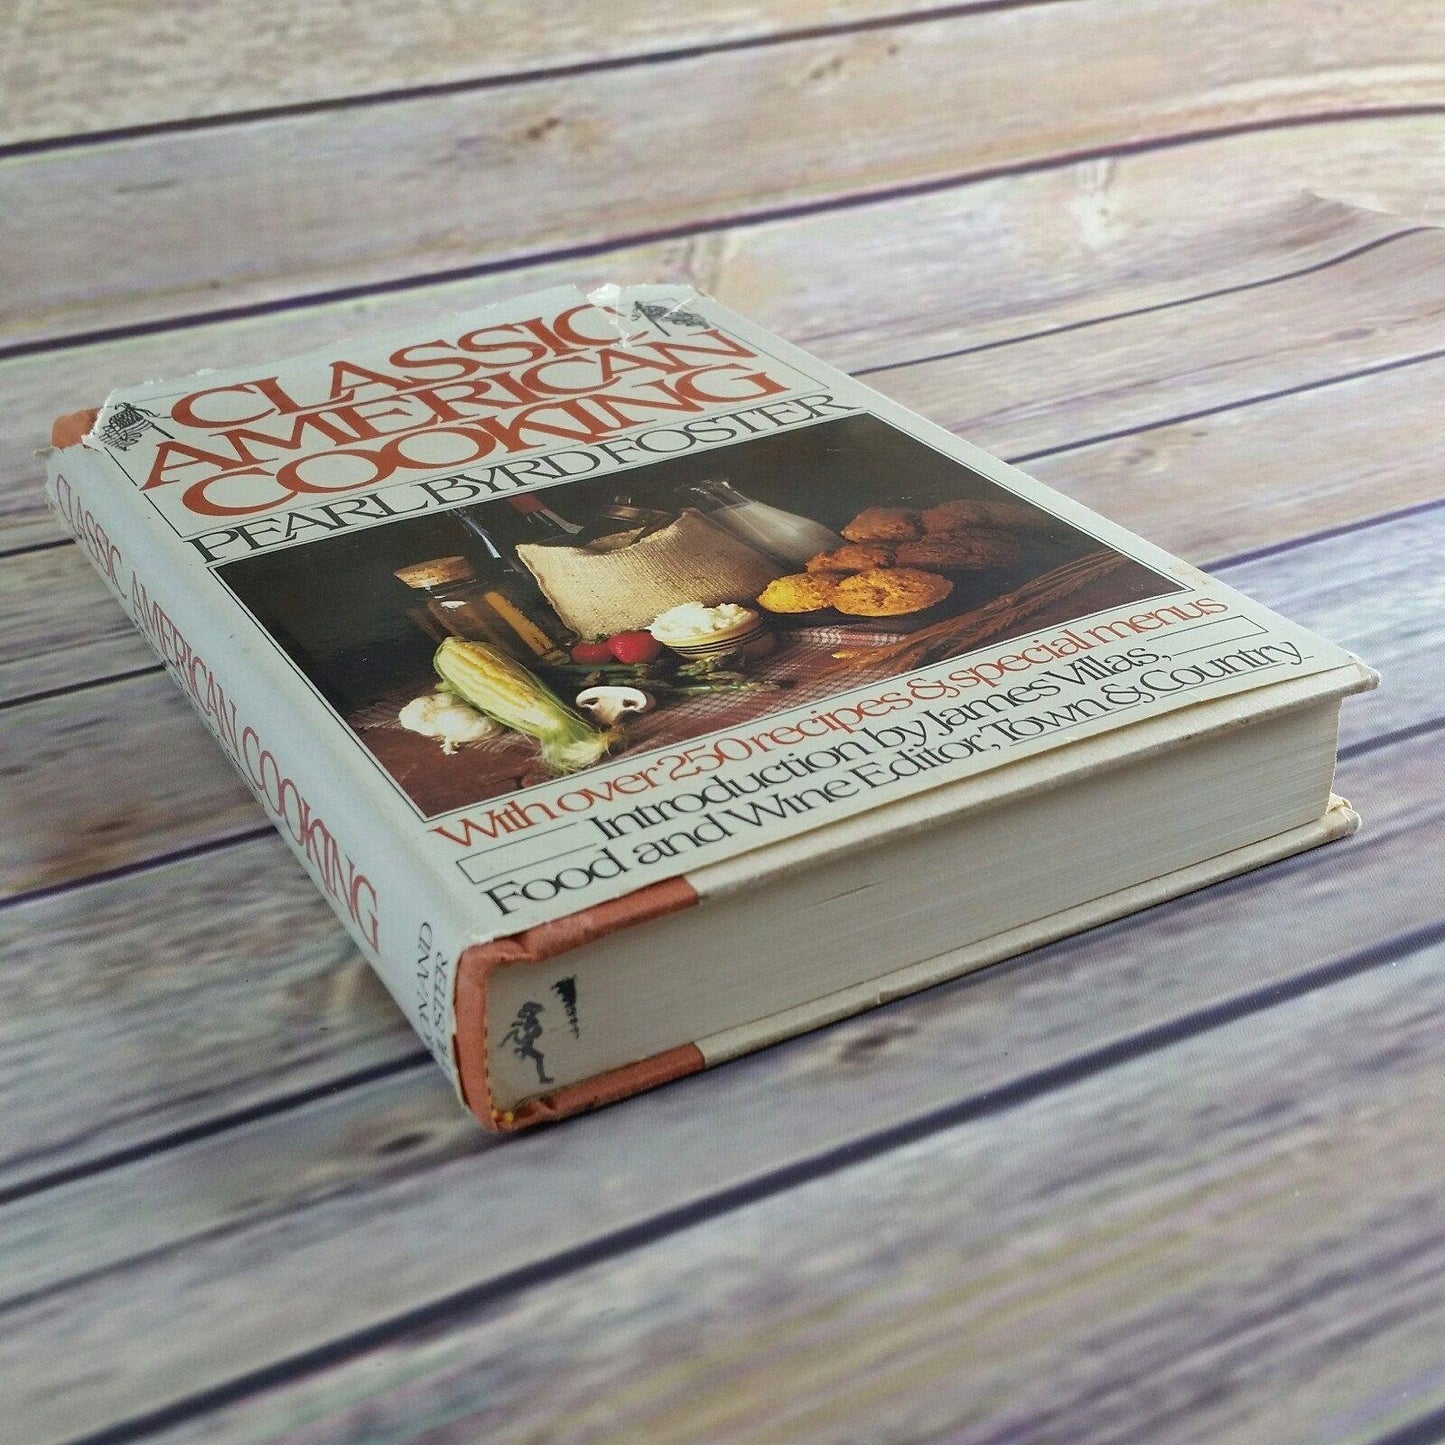 Vintage Cookbook Classic American Cooking 1983 Pearl Byrd Foster Hardcover with Dust Jacket 250 Recipes and Menus